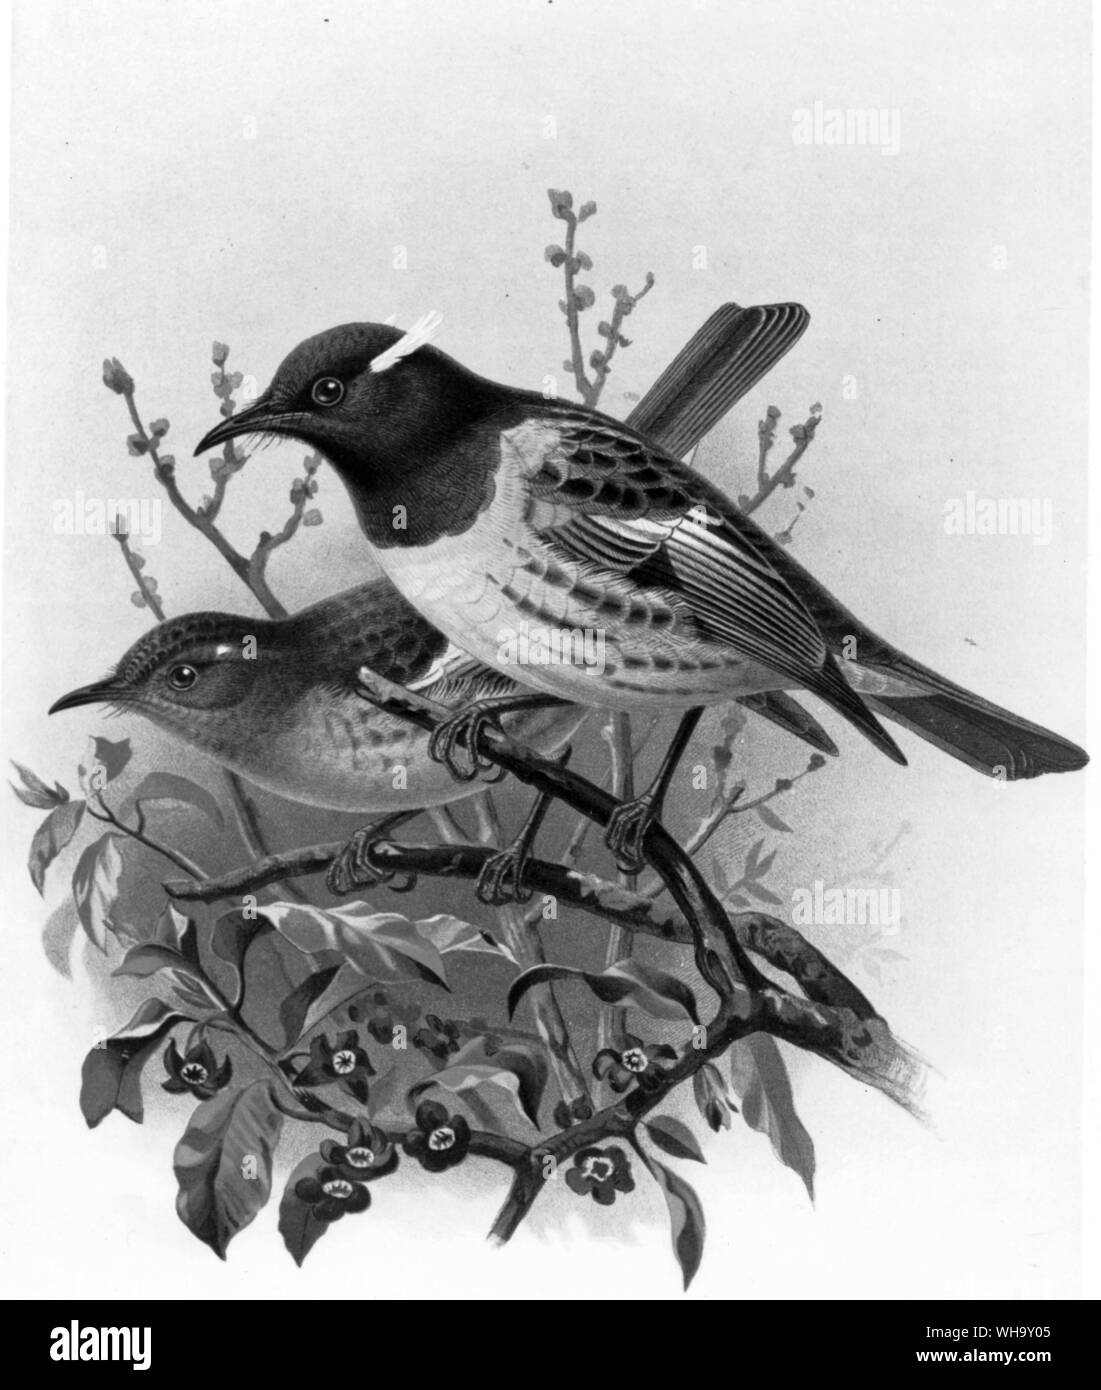 Stitchbirds (Notiomystis cincta), male (front) and female (behind). This species has become extinct on the New Zealand mainland but a small population still survives on Little Barrier Island. Chromolithograph after a painting by J.G. Keulemans from W.I. Buller's History of the Birds of New Zealand, Vol. 1 (London, 1887-8), Pl.11. Stock Photo